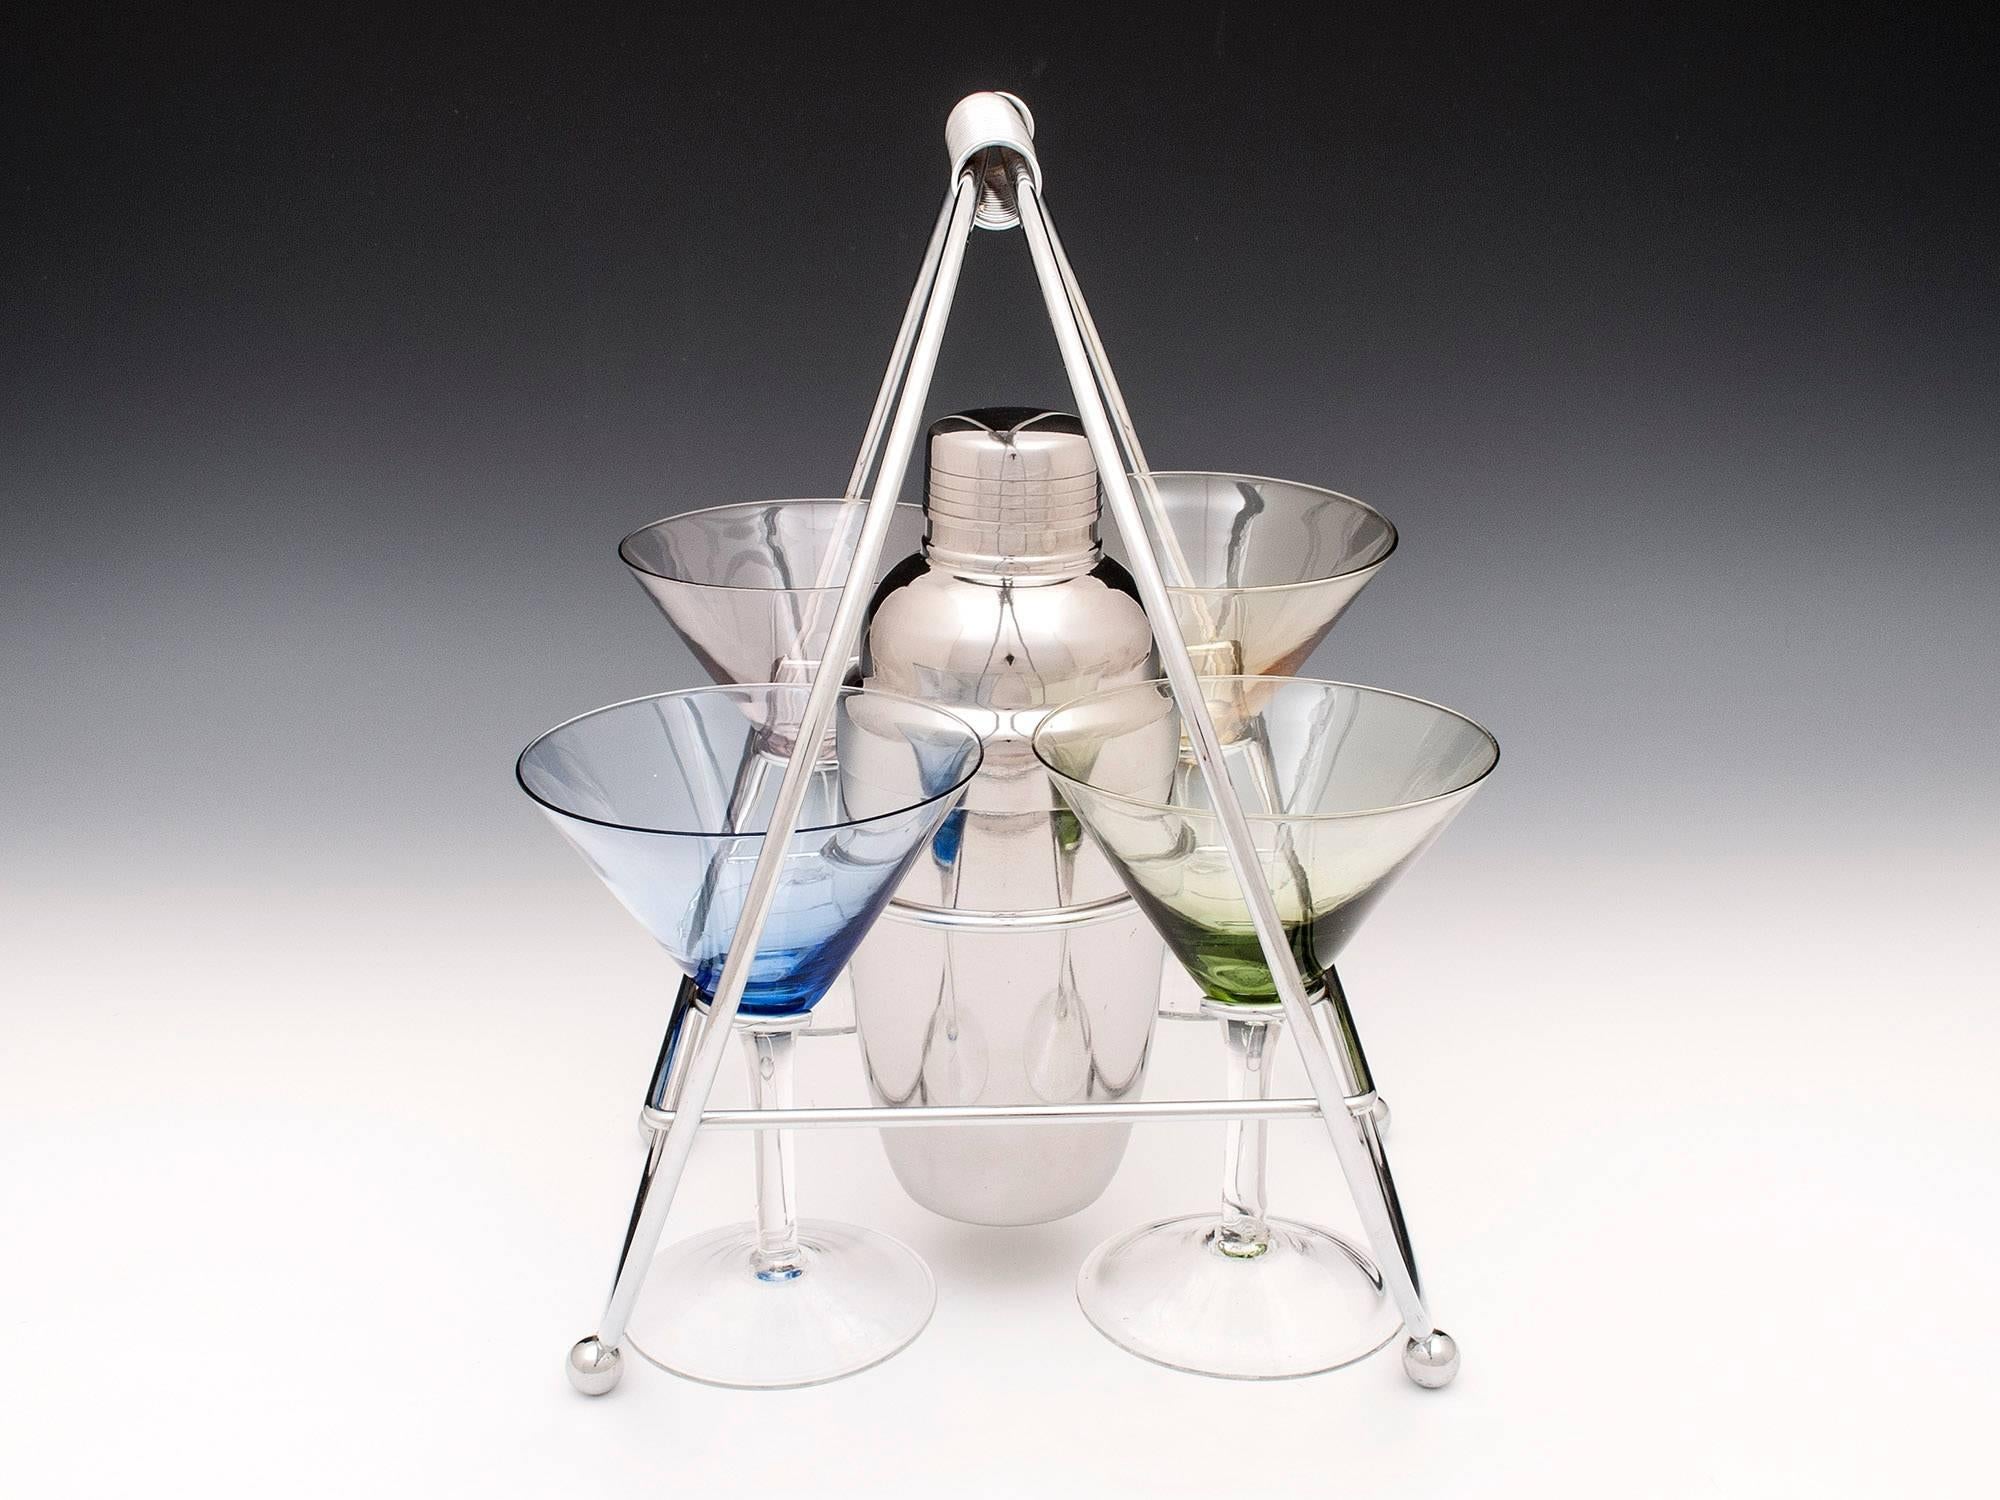 Vintage cocktail set with four coloured cocktail glasses, stainless steel cocktail shaker and chrome carrying frame. 

Cocktail shaker Dimensions: 
Height: 7.75' 
Diameter: 3.5' 

Shipping Cost: 
United Kingdom £25 
Europe £65